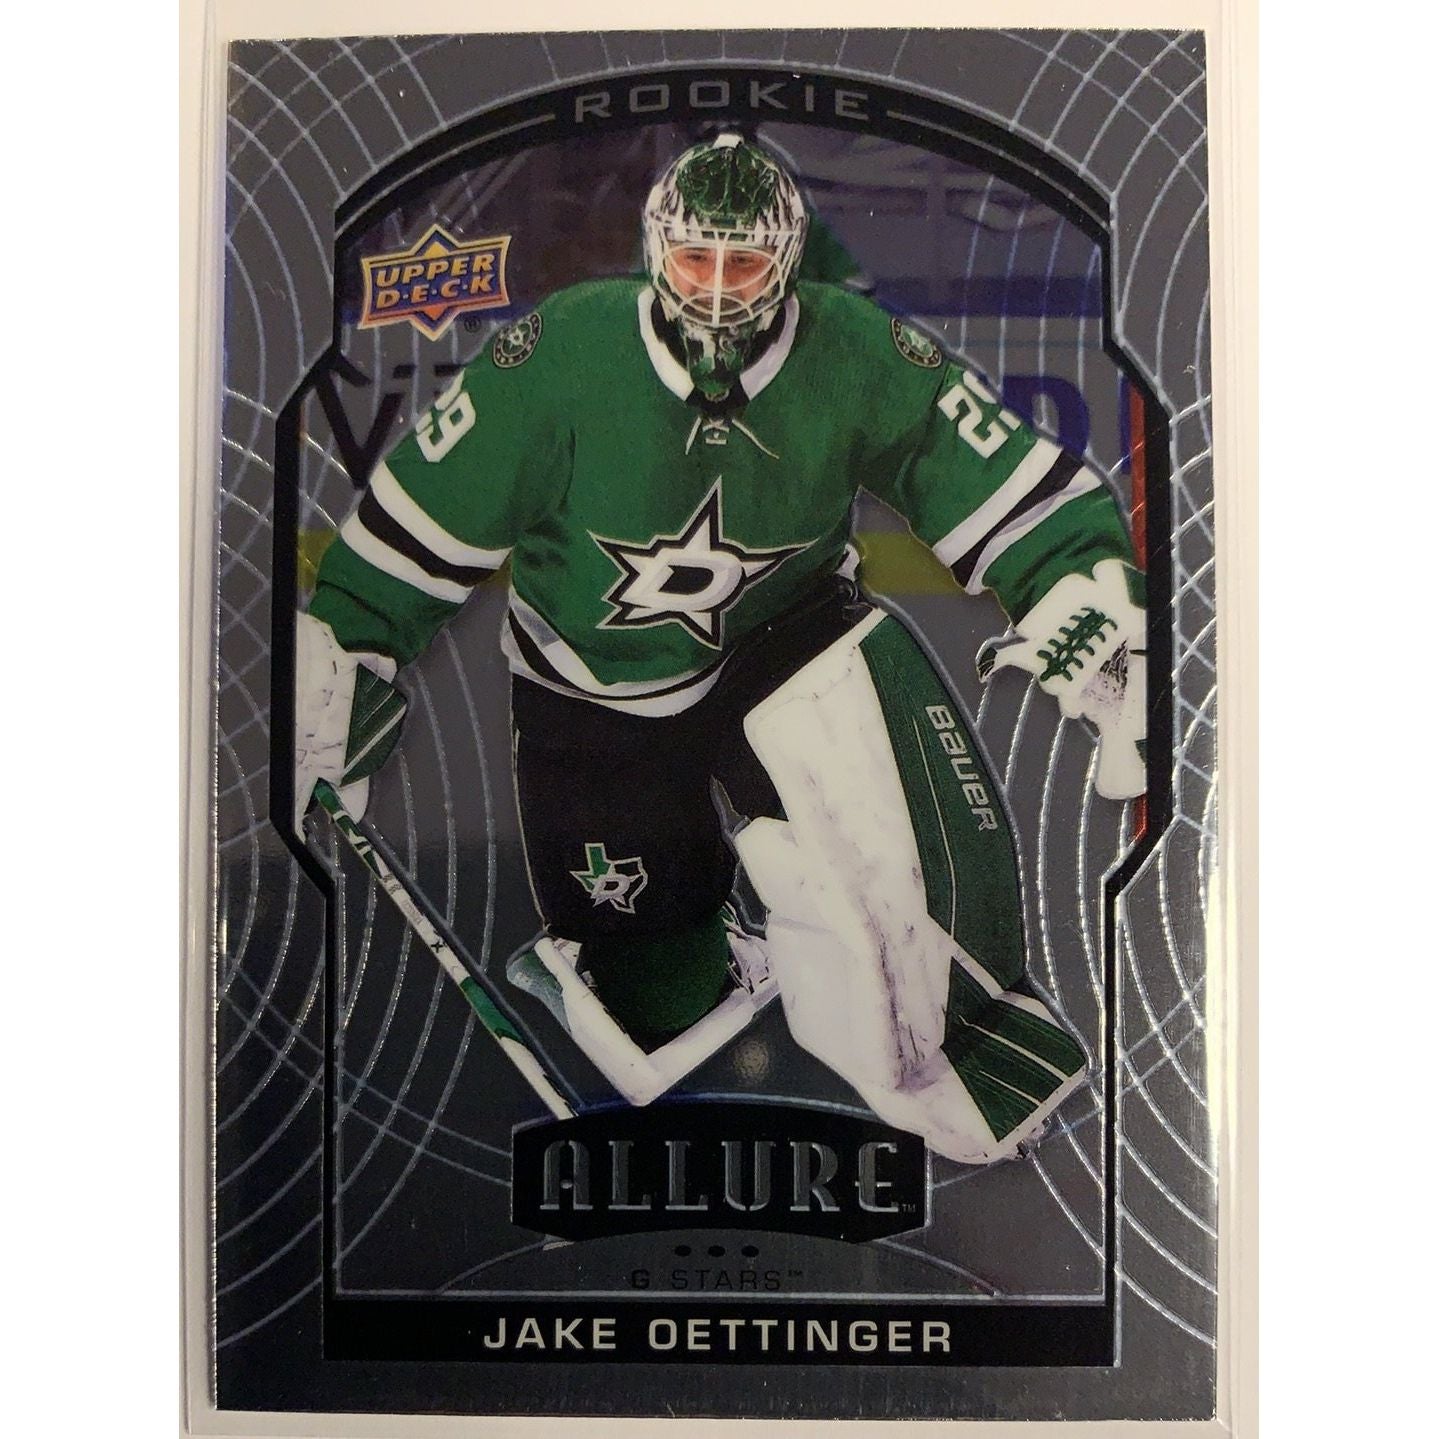  2020-21 Allure Jake Oettinger Rookie  Local Legends Cards & Collectibles